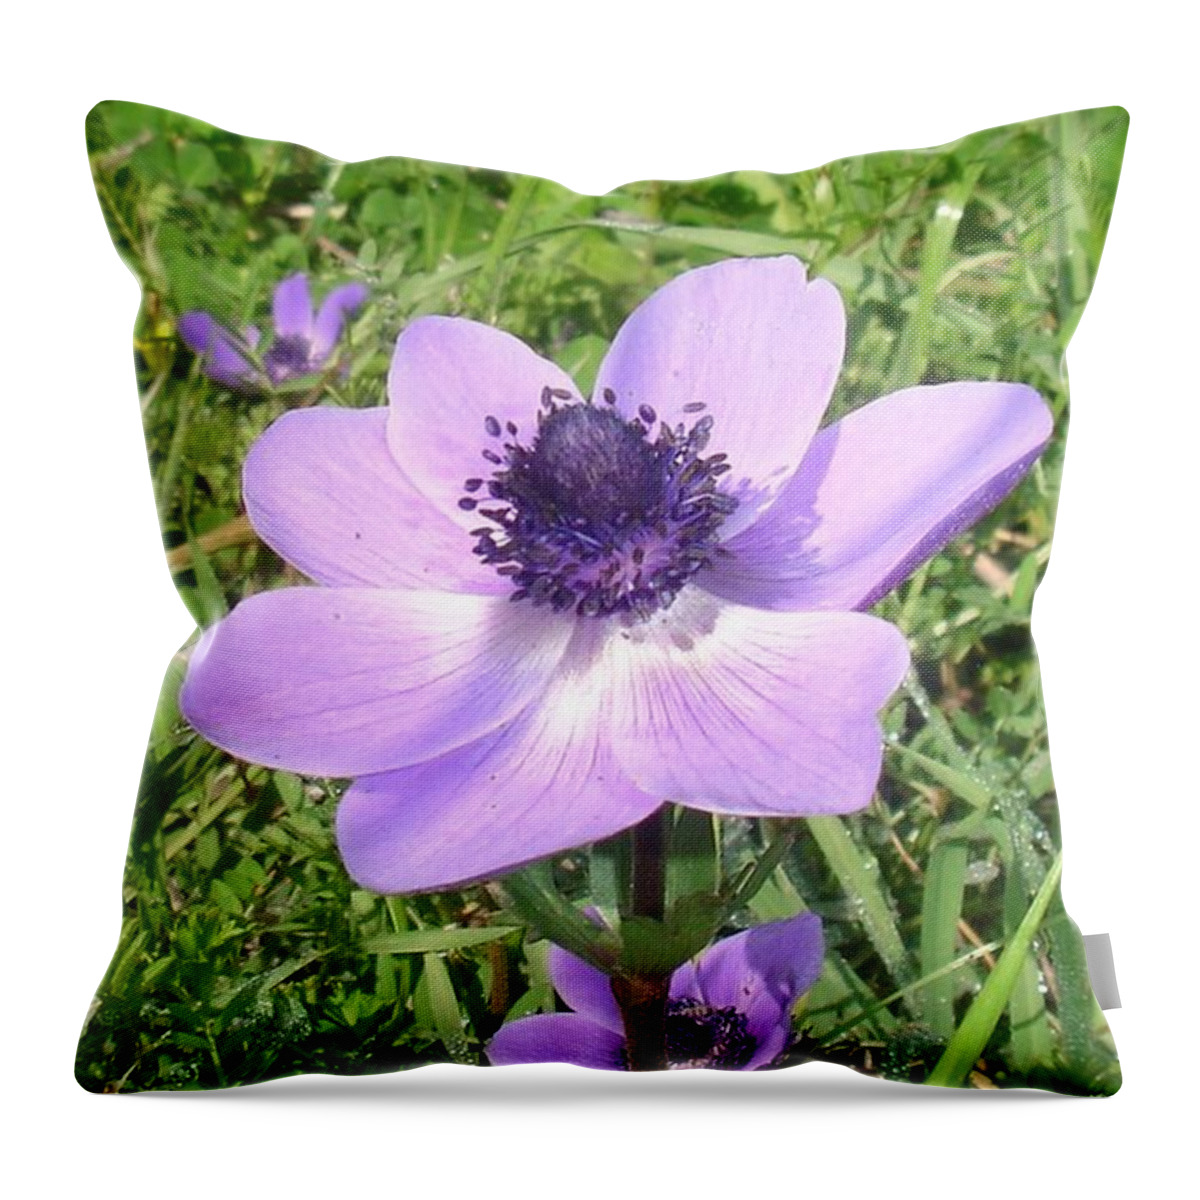 Anemone Coronaria Throw Pillow featuring the photograph One Delicate Pale Lilac Anemone Coronaria Wild Flower by Taiche Acrylic Art